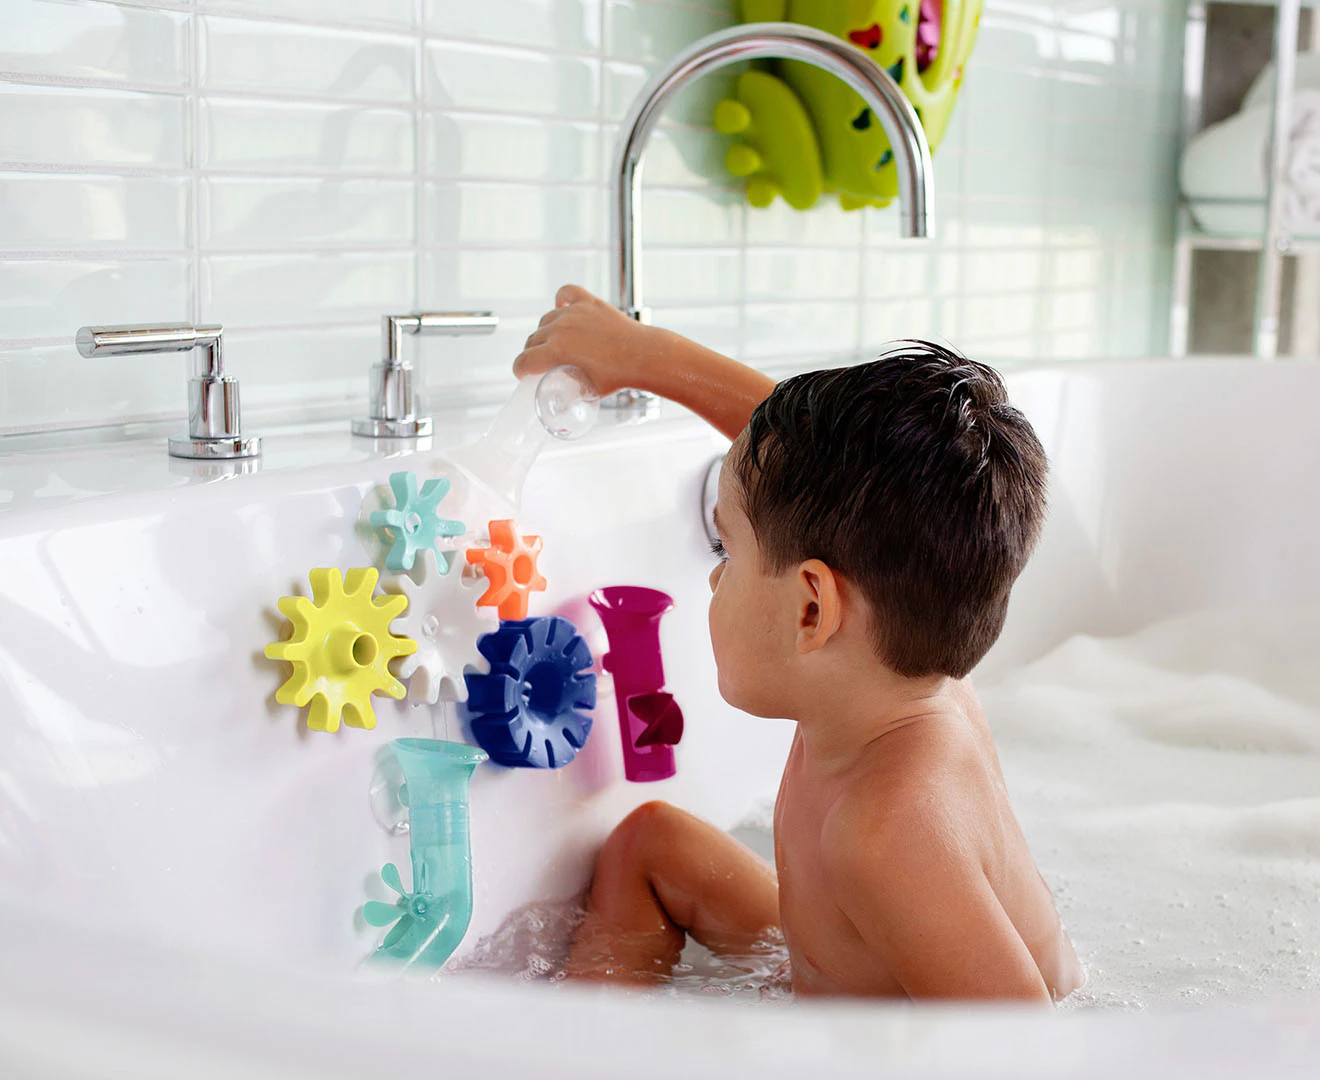 BIG sale on Boon Drying Rack, Bath Toys + more!